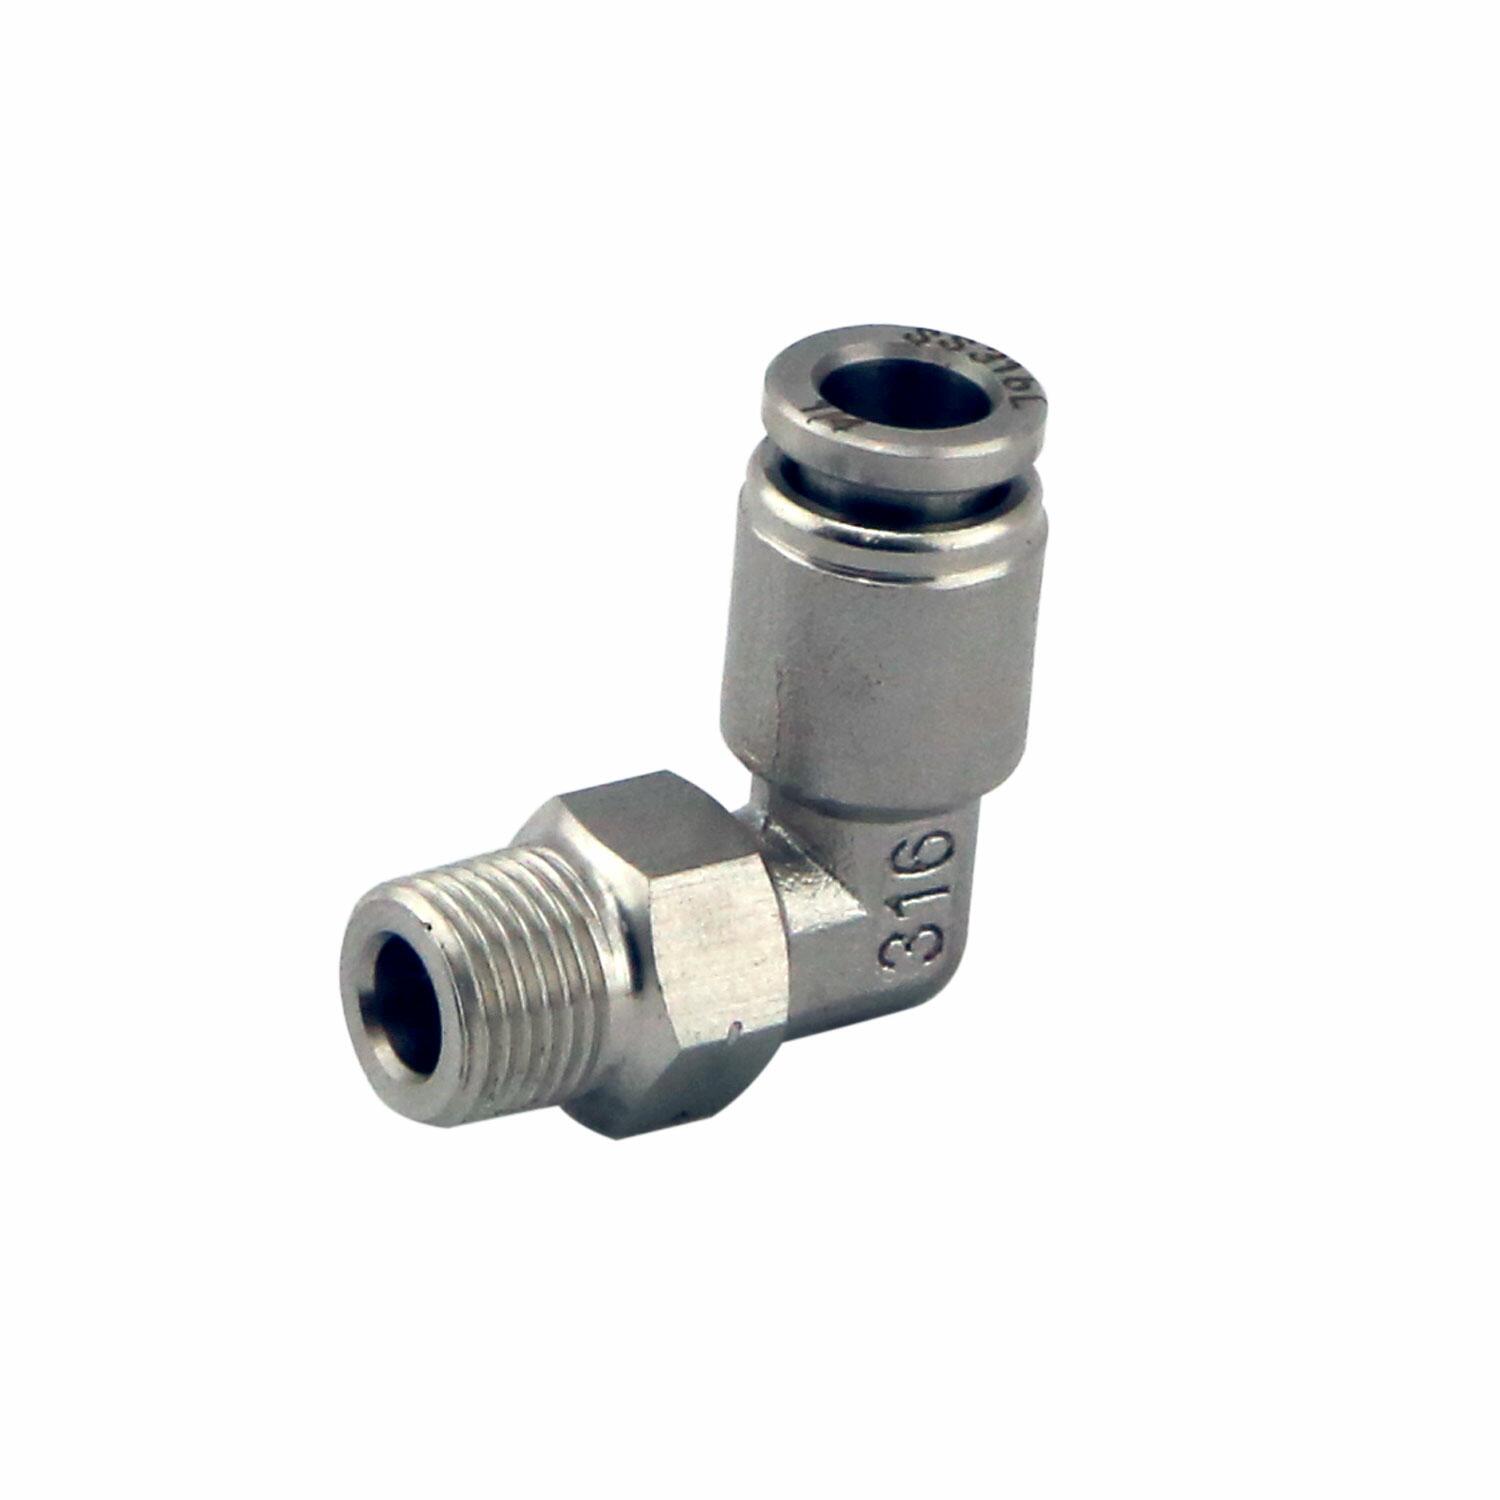 Hose Tail Fittings & Blanks - 1/8 NPT to 6mm